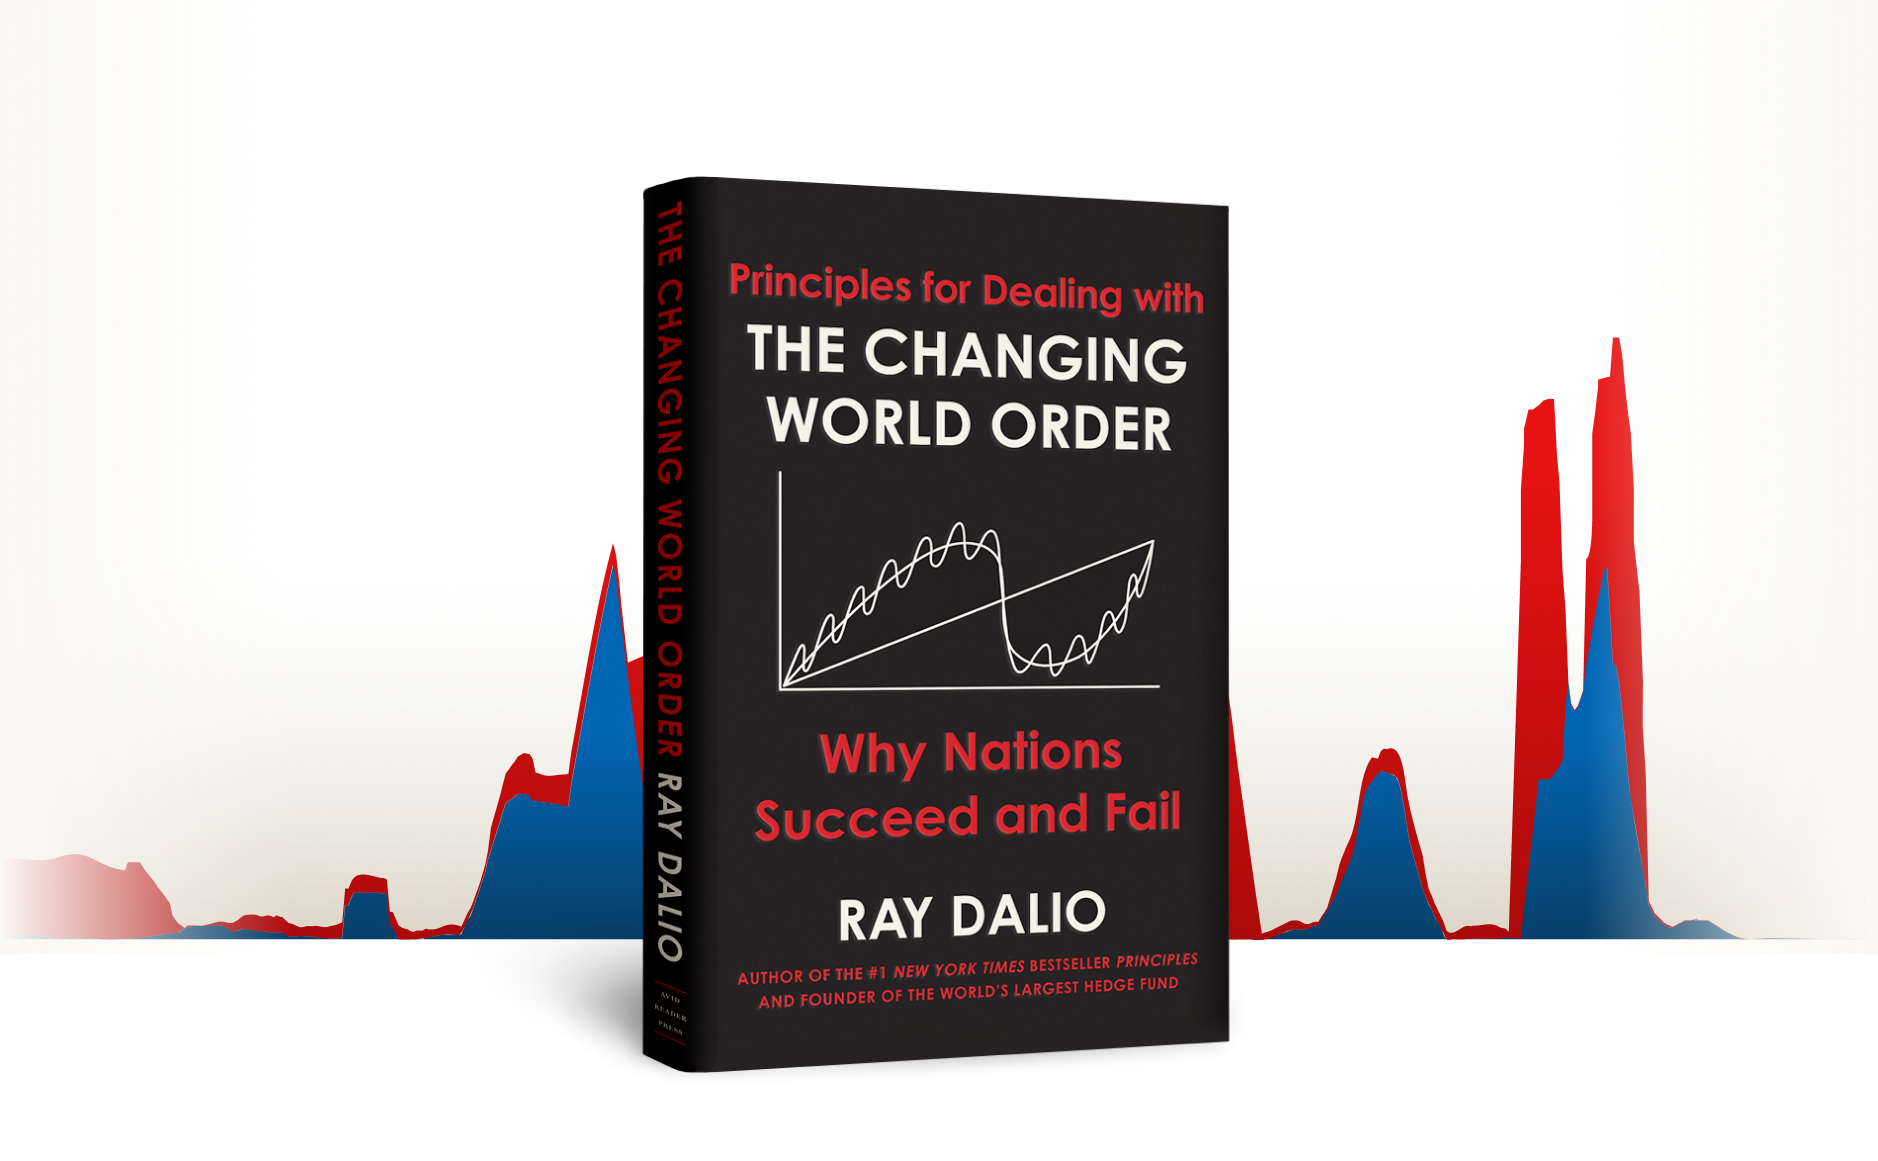 The Changing World Order Book